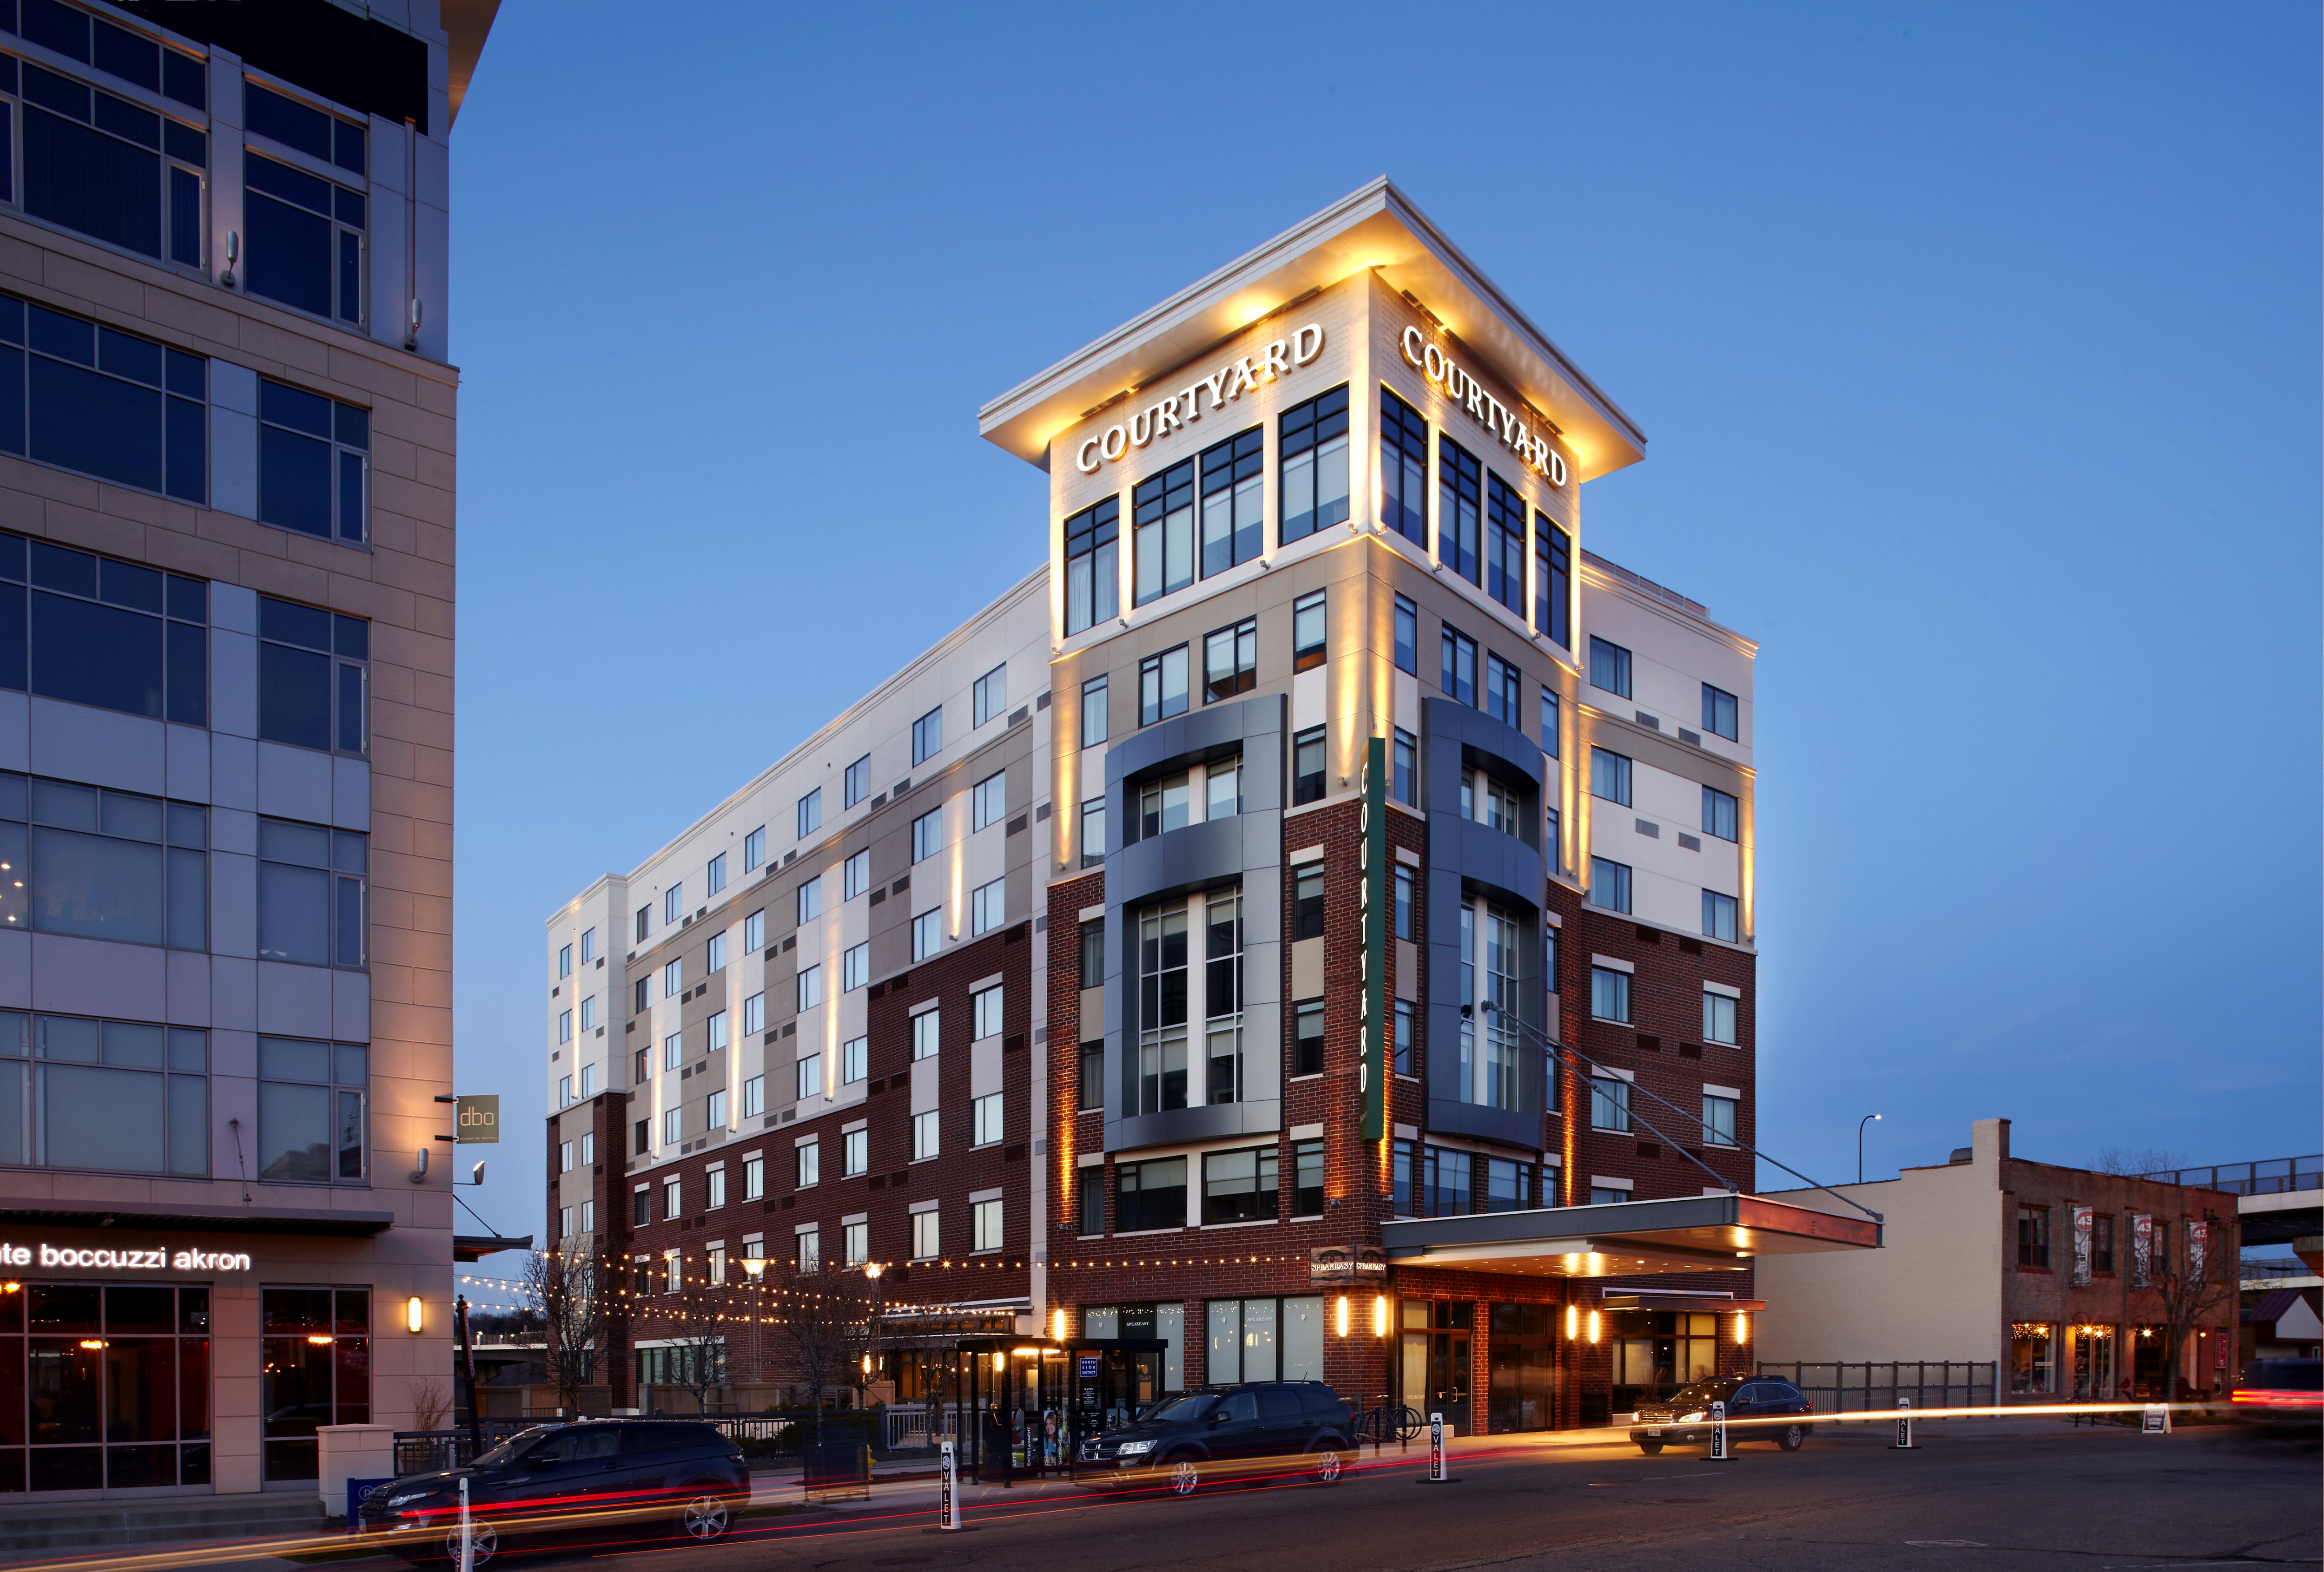 Courtyard by Marriott Akron Downtown managed by Concord Hospitality Enterprises